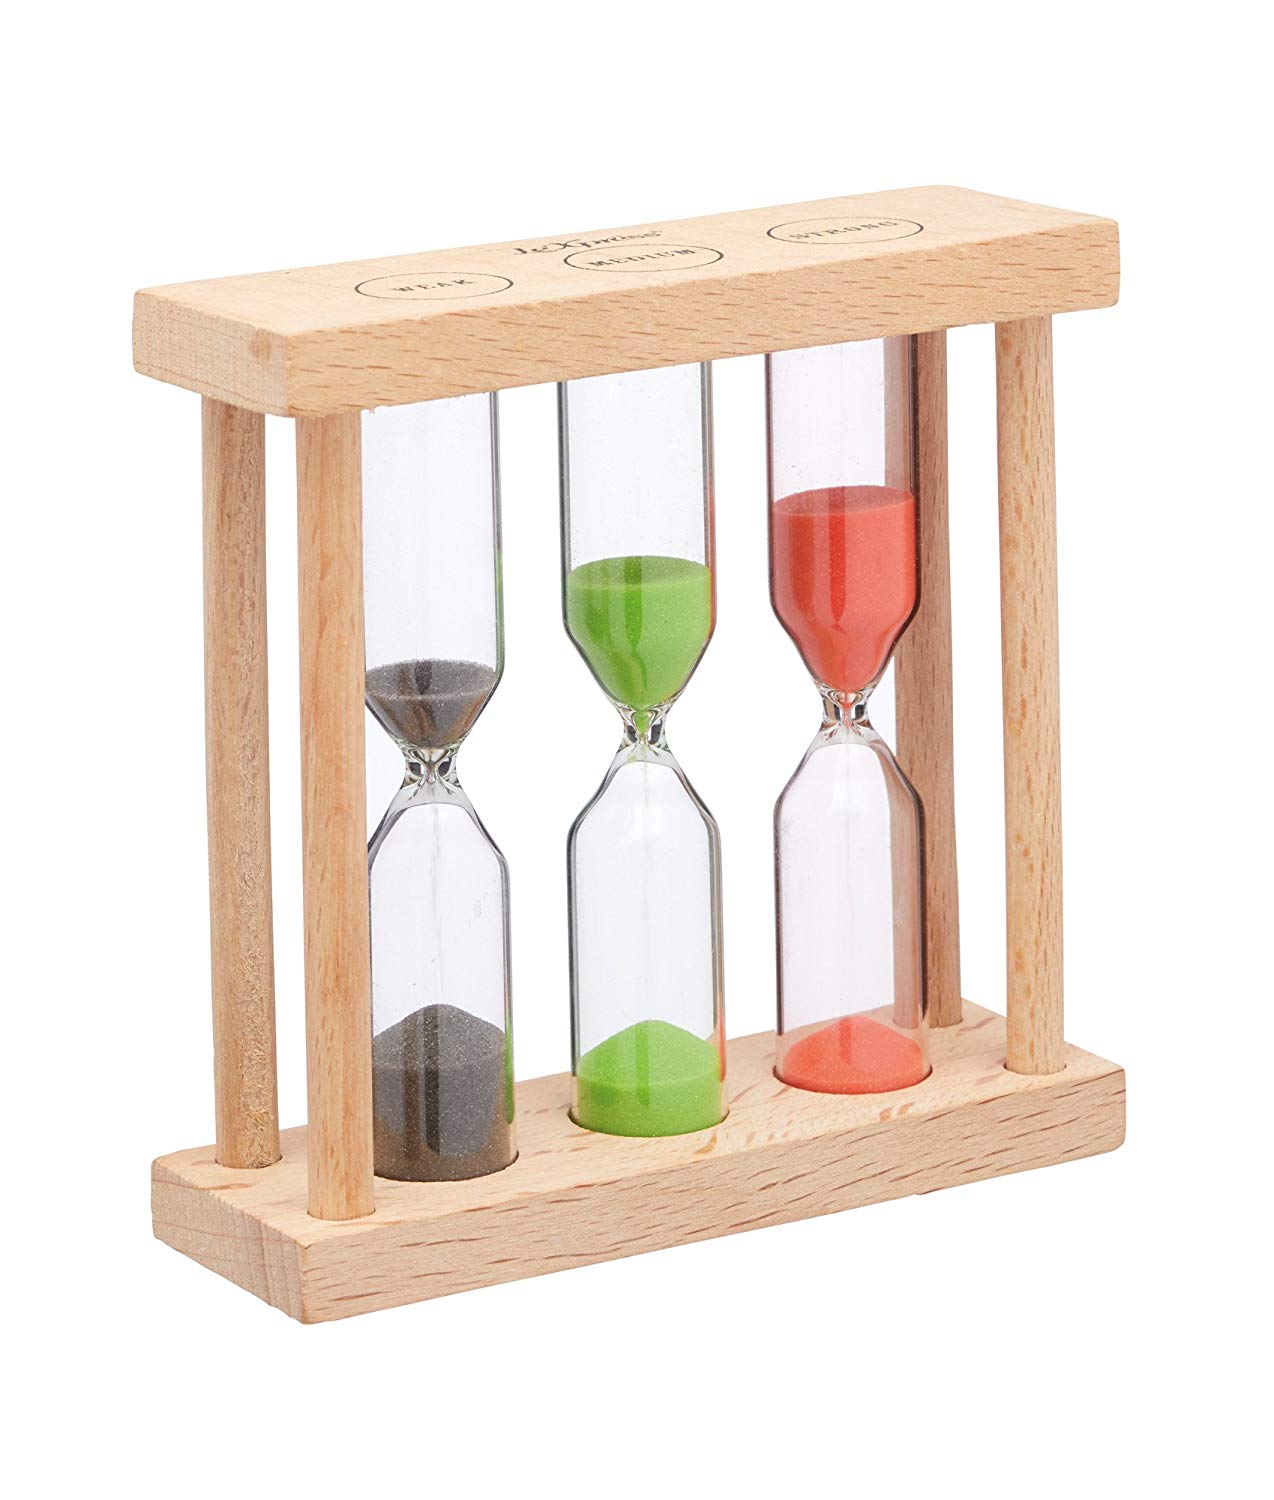 Kitchencraft Kclxteatime Hourglass Set, Brown